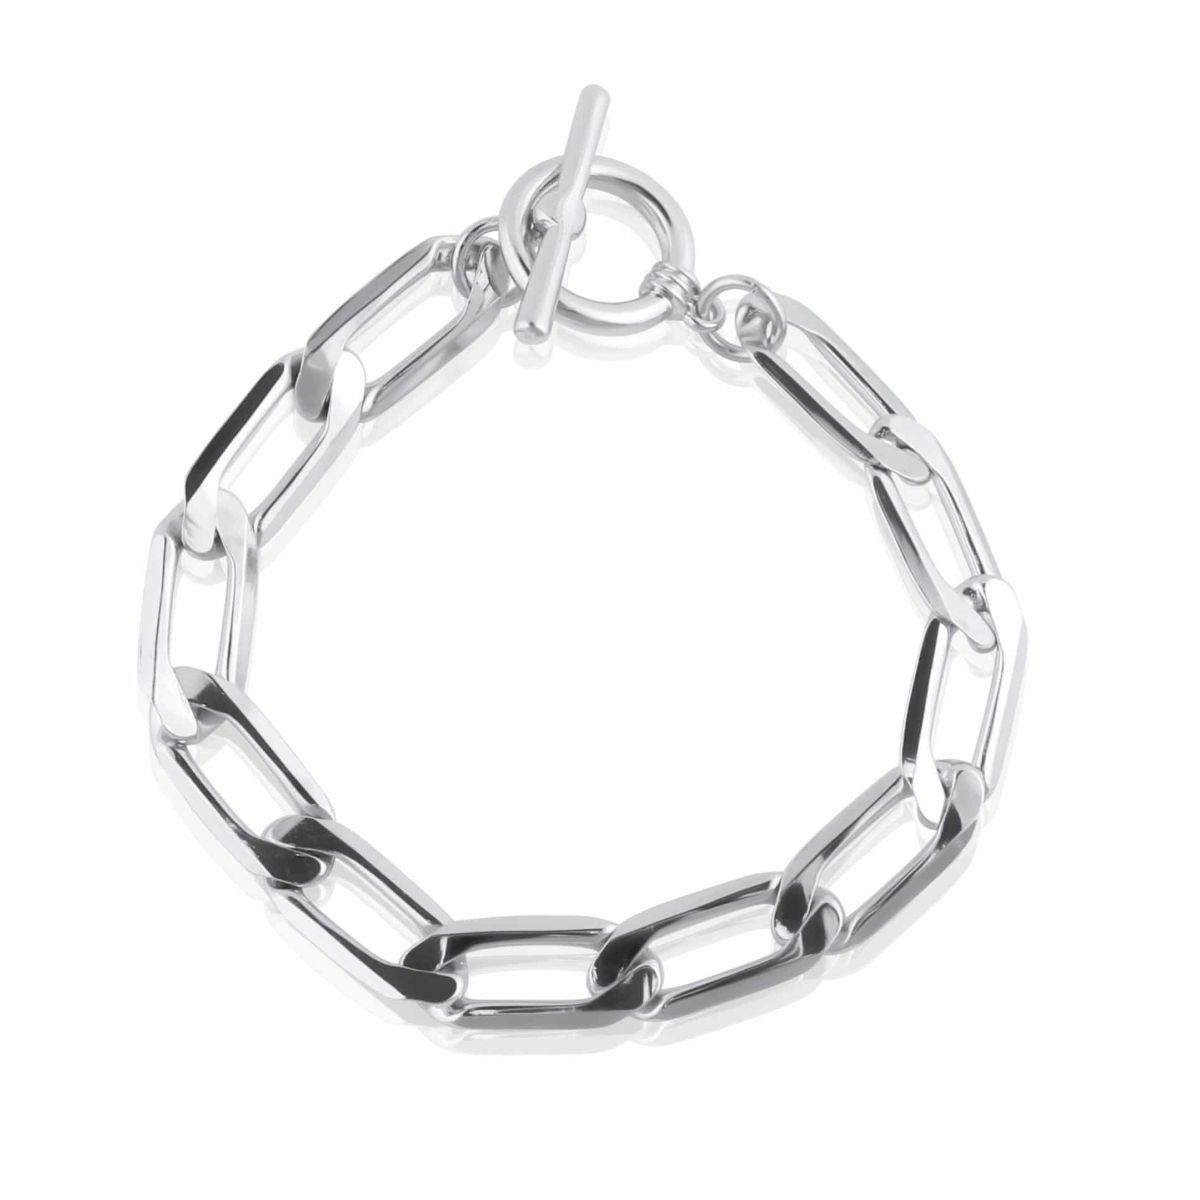 Big Metal Flavia Plated Statement Chain T-Bar Bracelet in Silver